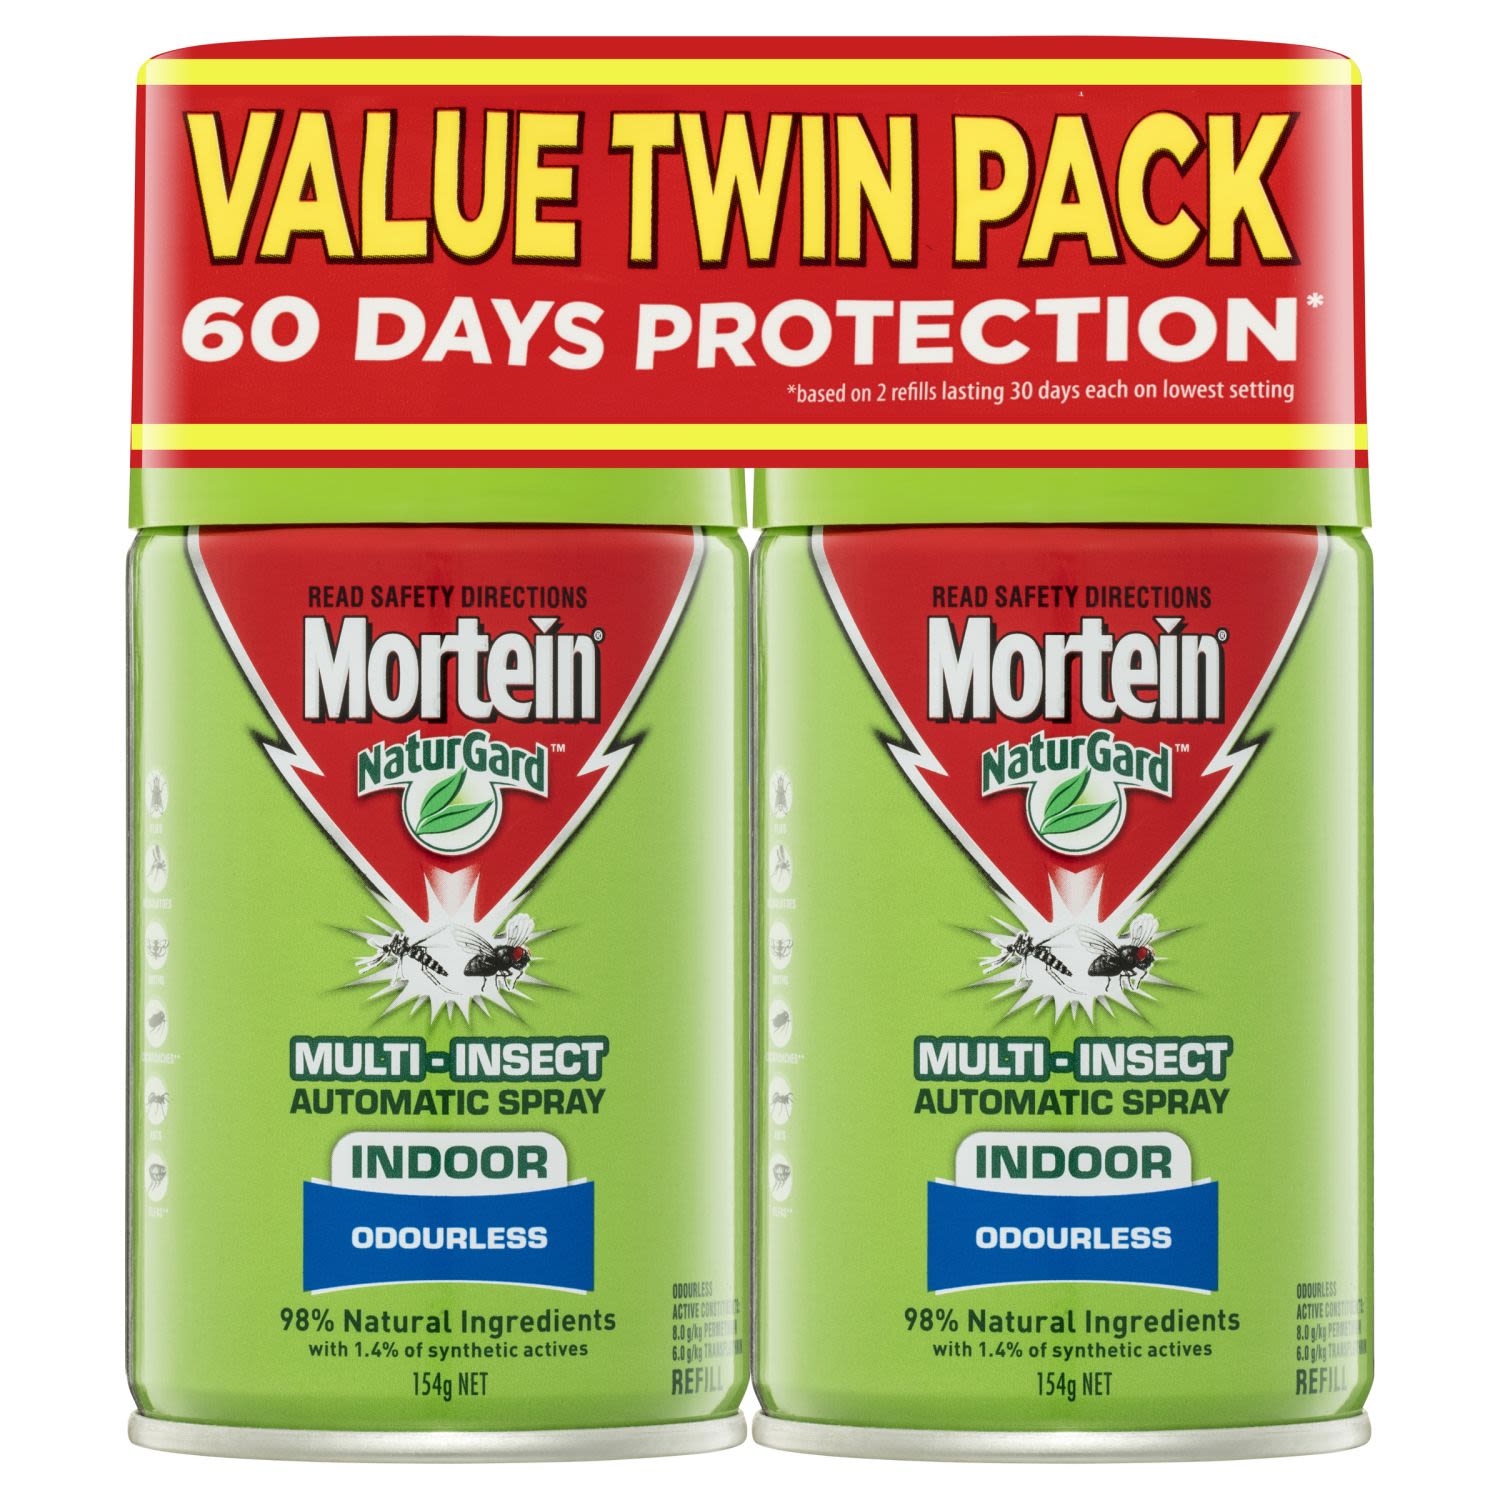 Mortein Naturgard Automatic Indoor Insect Control Refill Odourless Multi Insect Killer, 2 Each